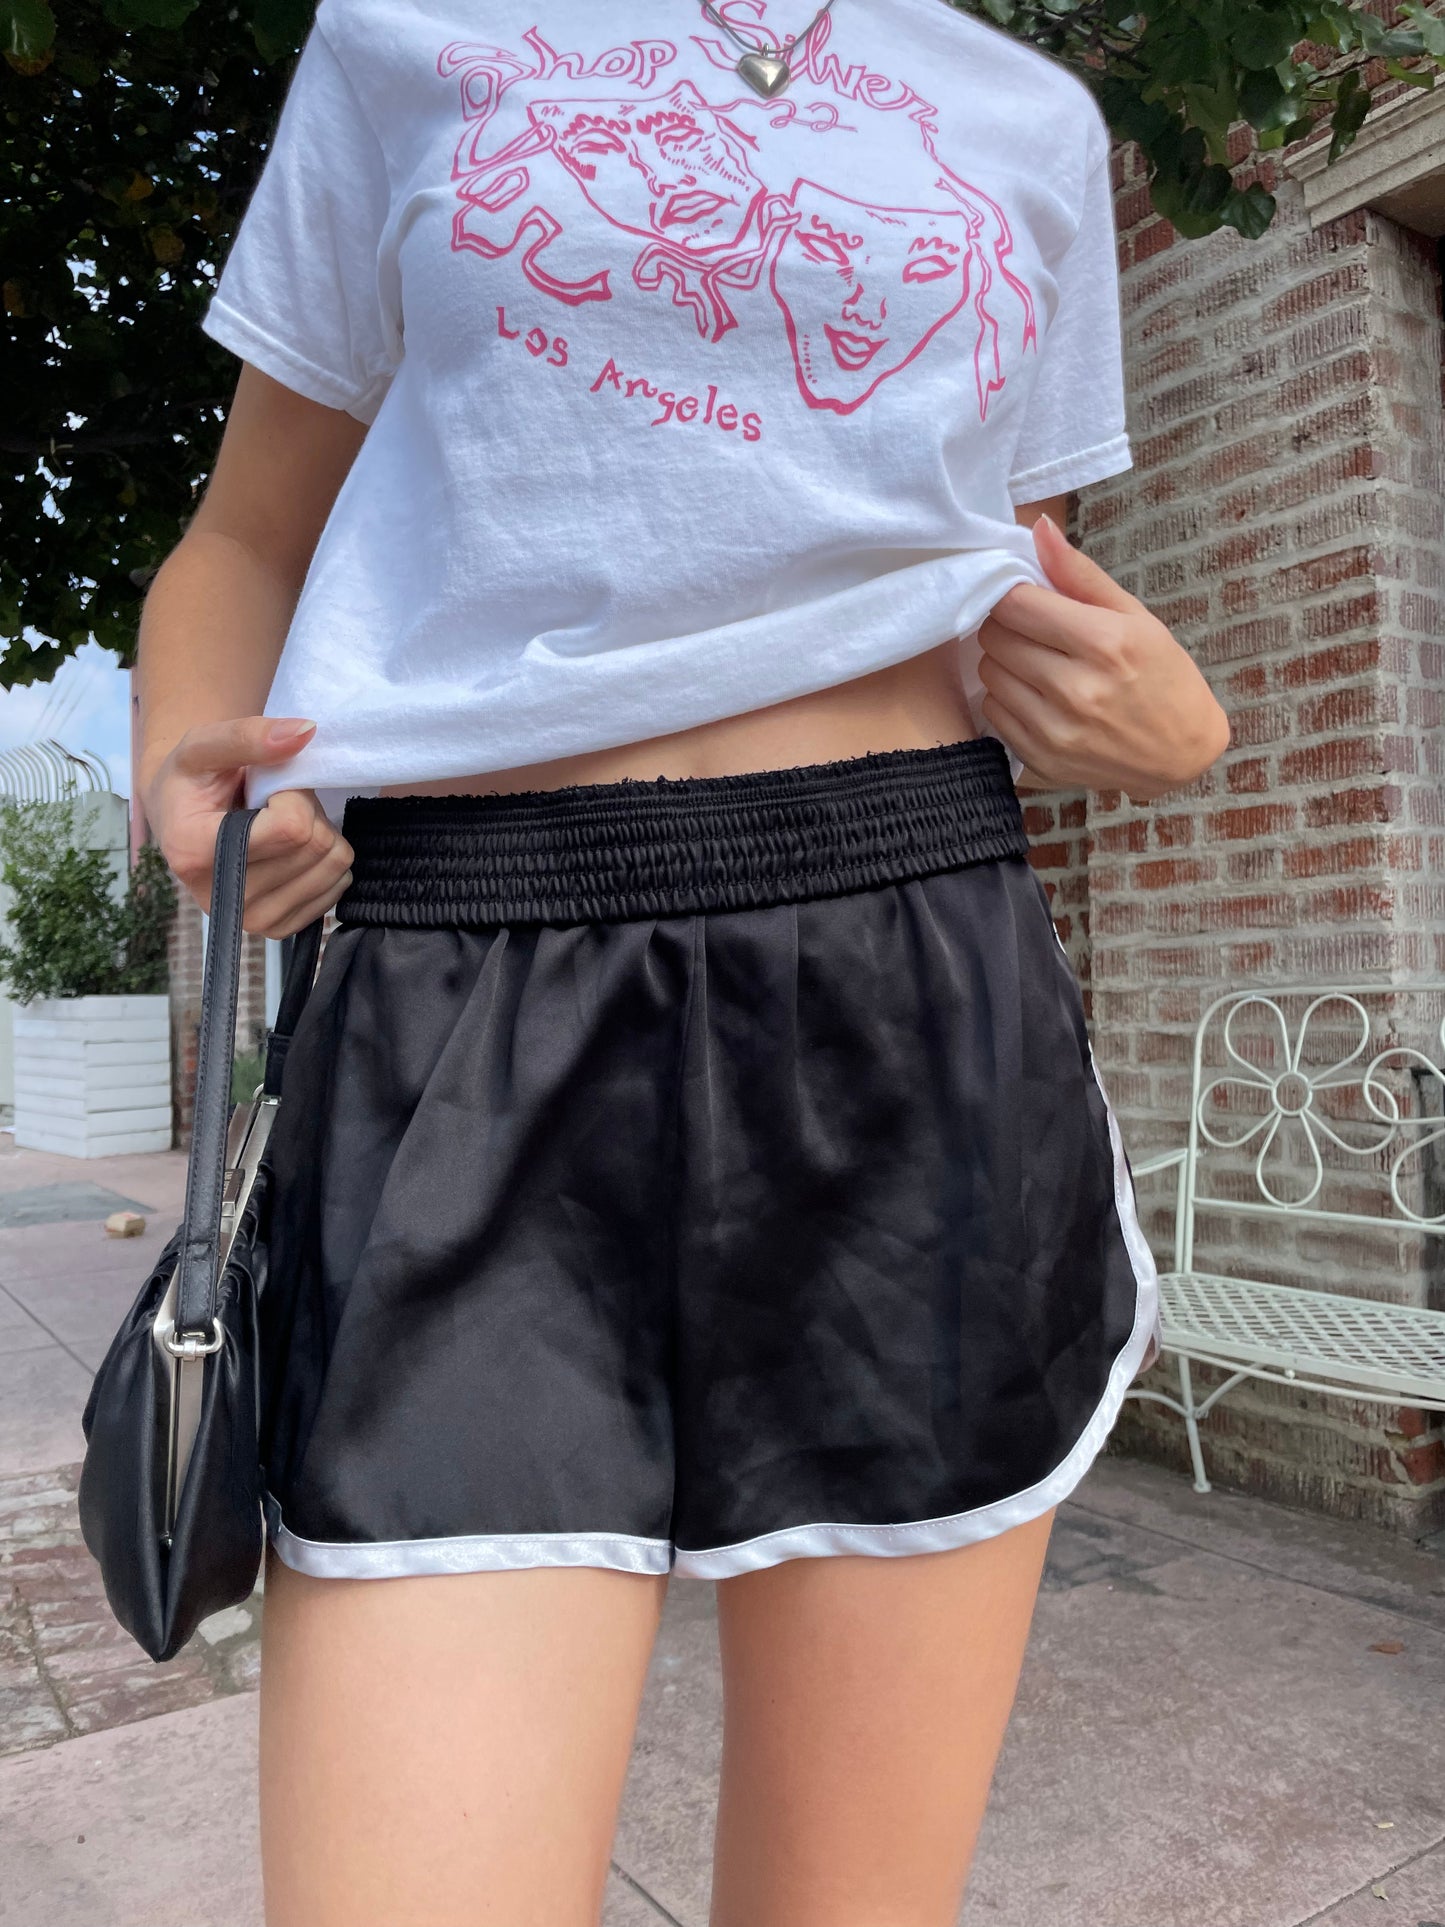 girl in graphic t-shirt and black shorts